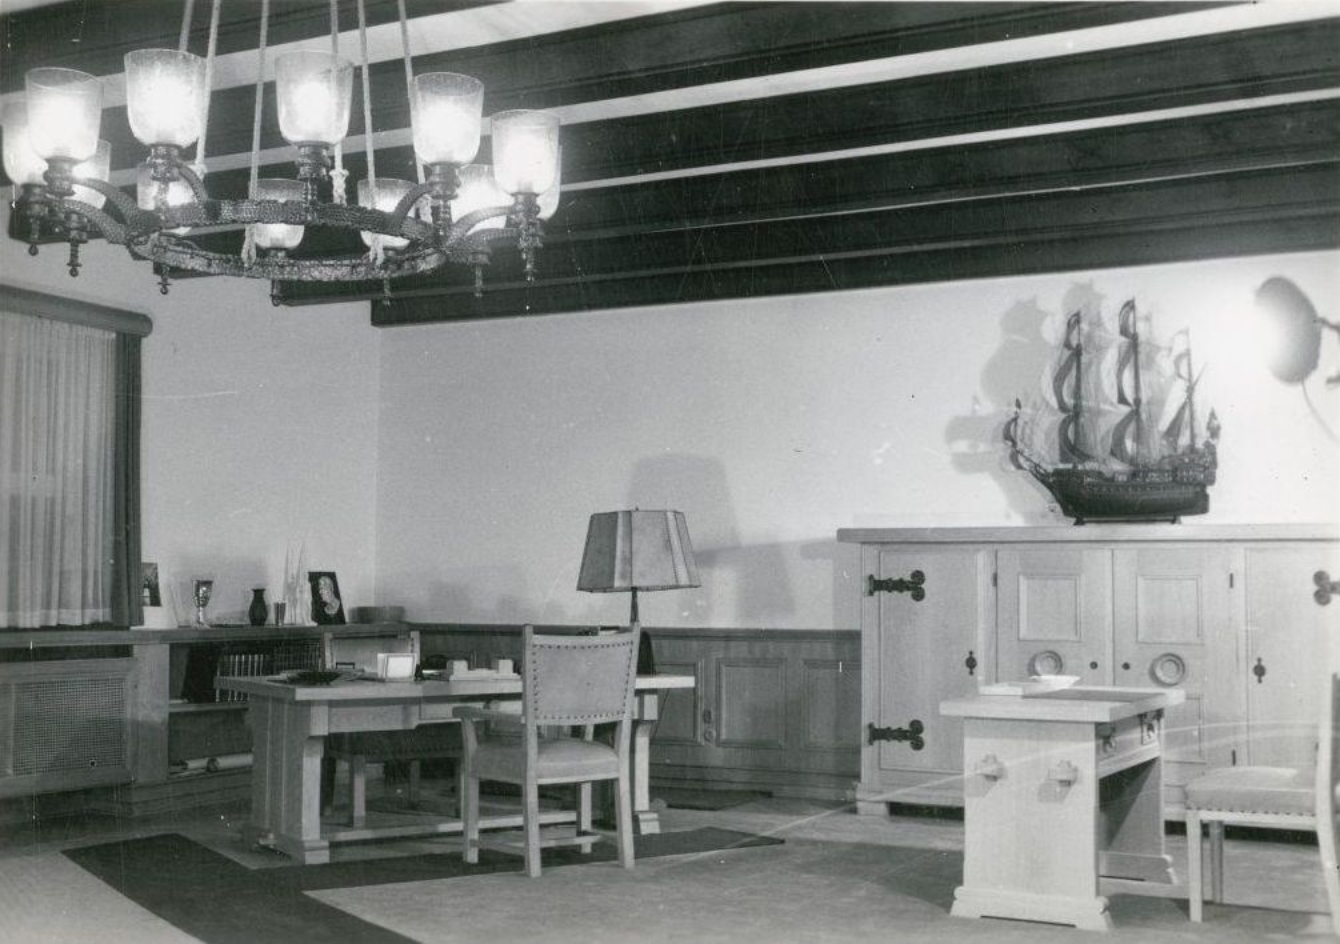 Office of the camp commandant. You can see the lampshade that was also shown on the table with the specimens on 16 April 1945.